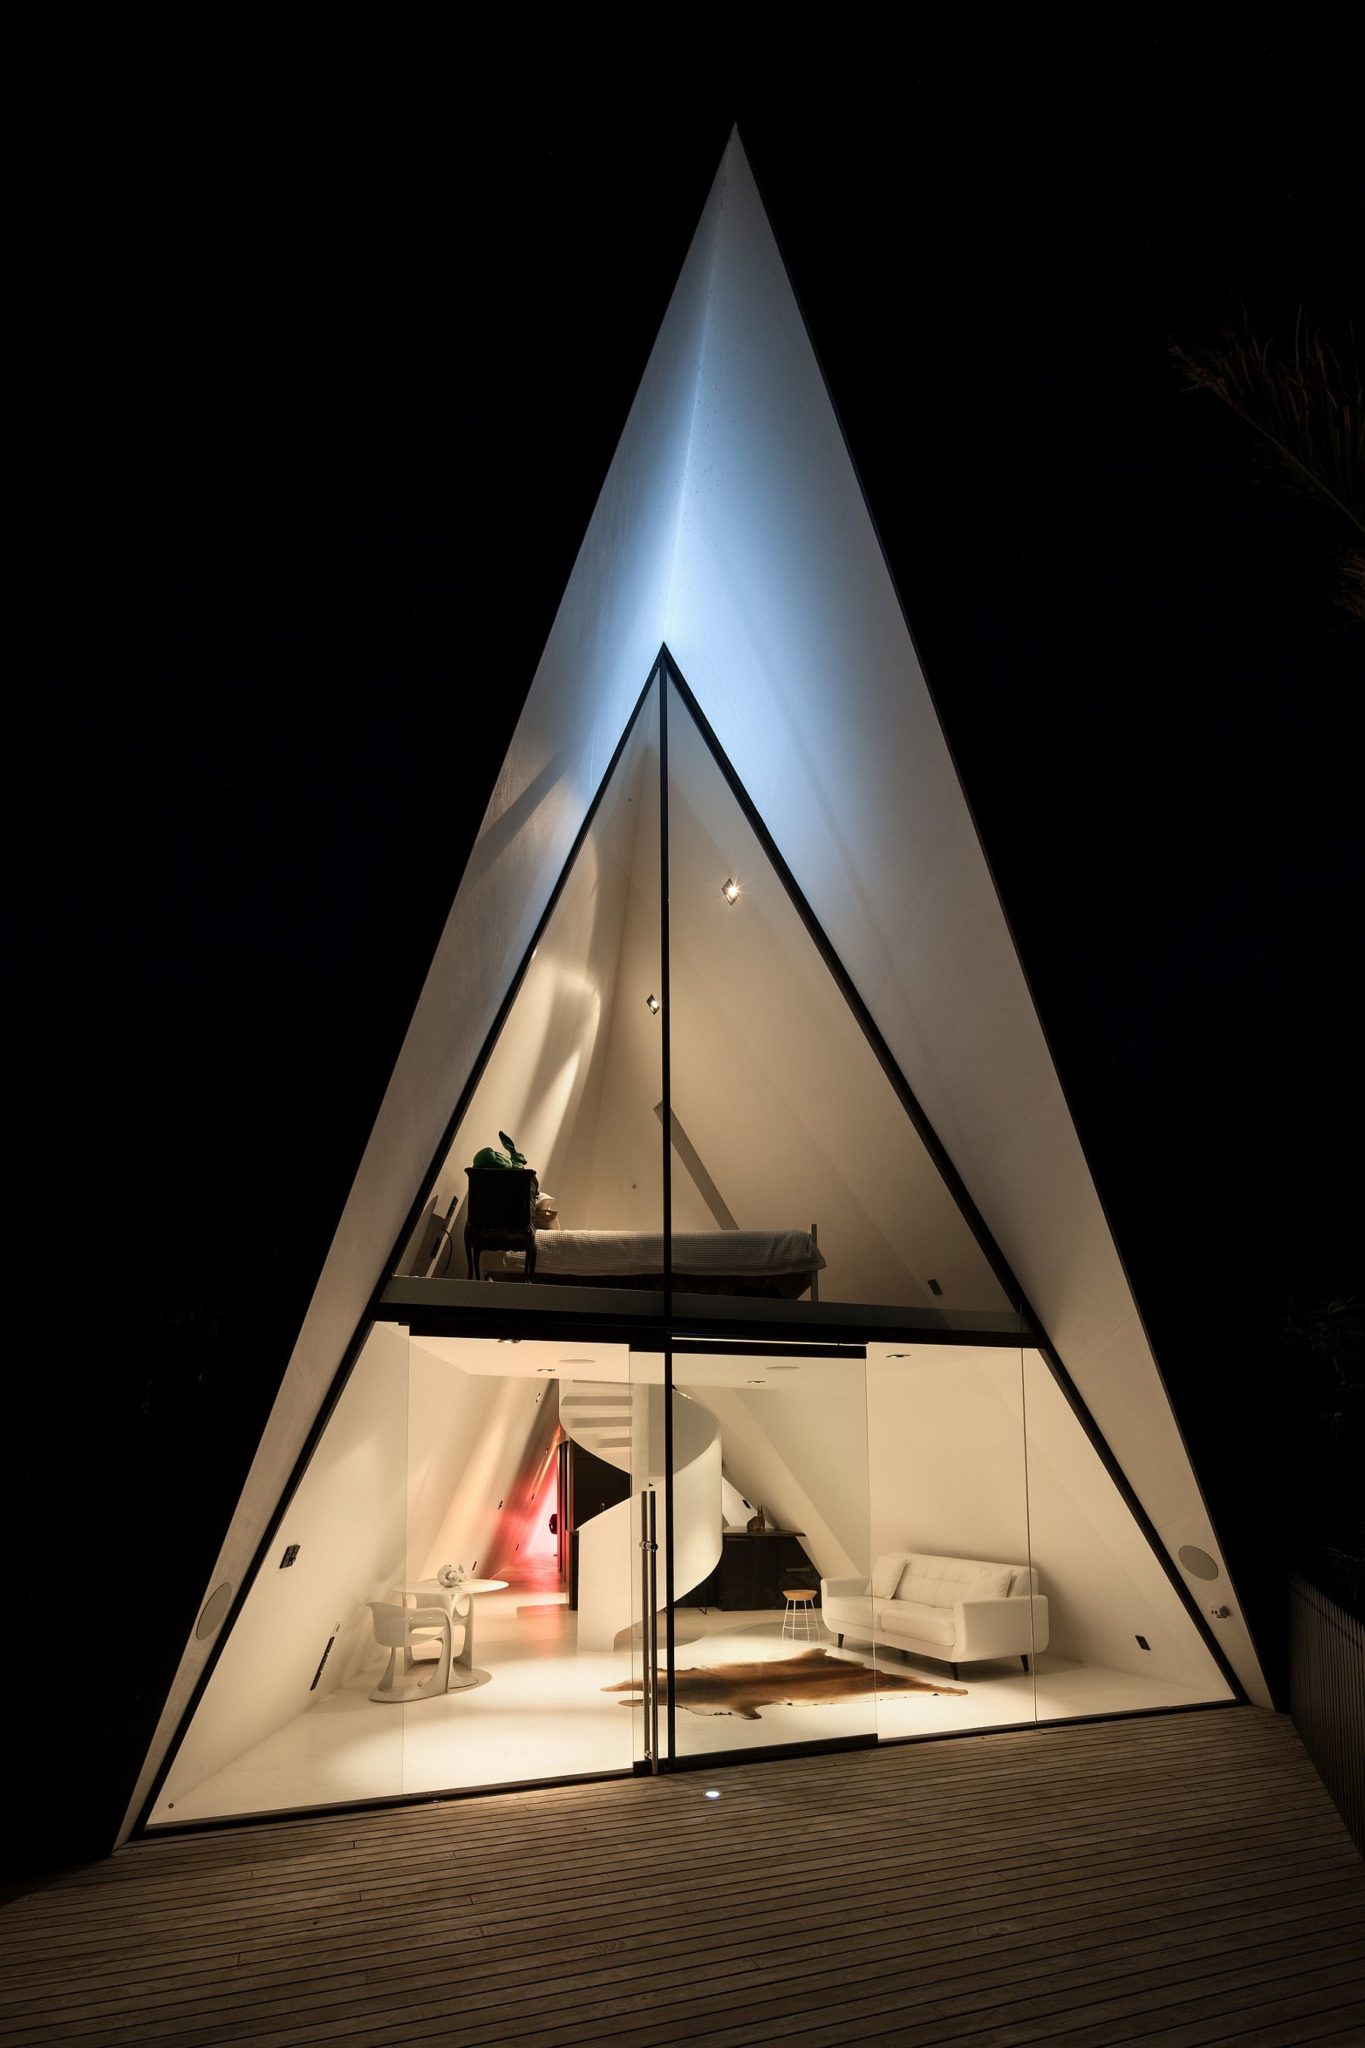 Dark-exterior-of-the-tent-house-allows-it-to-blend-into-the-backdrop